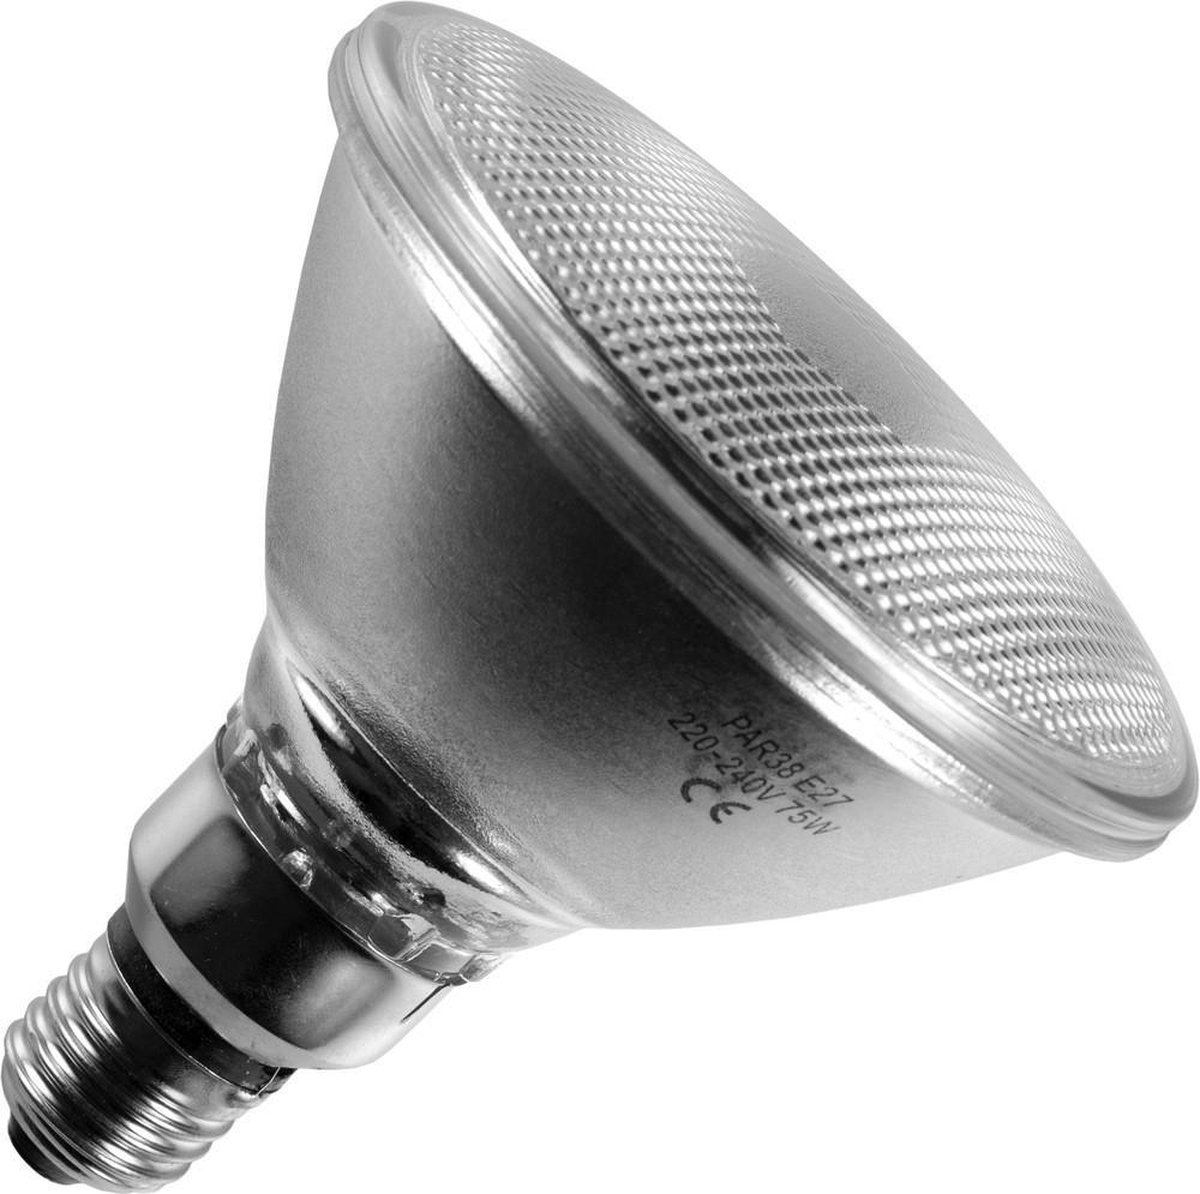 Gloeilamp Spot | Grote fitting E27 | 60W 122mm Mat - Plieger